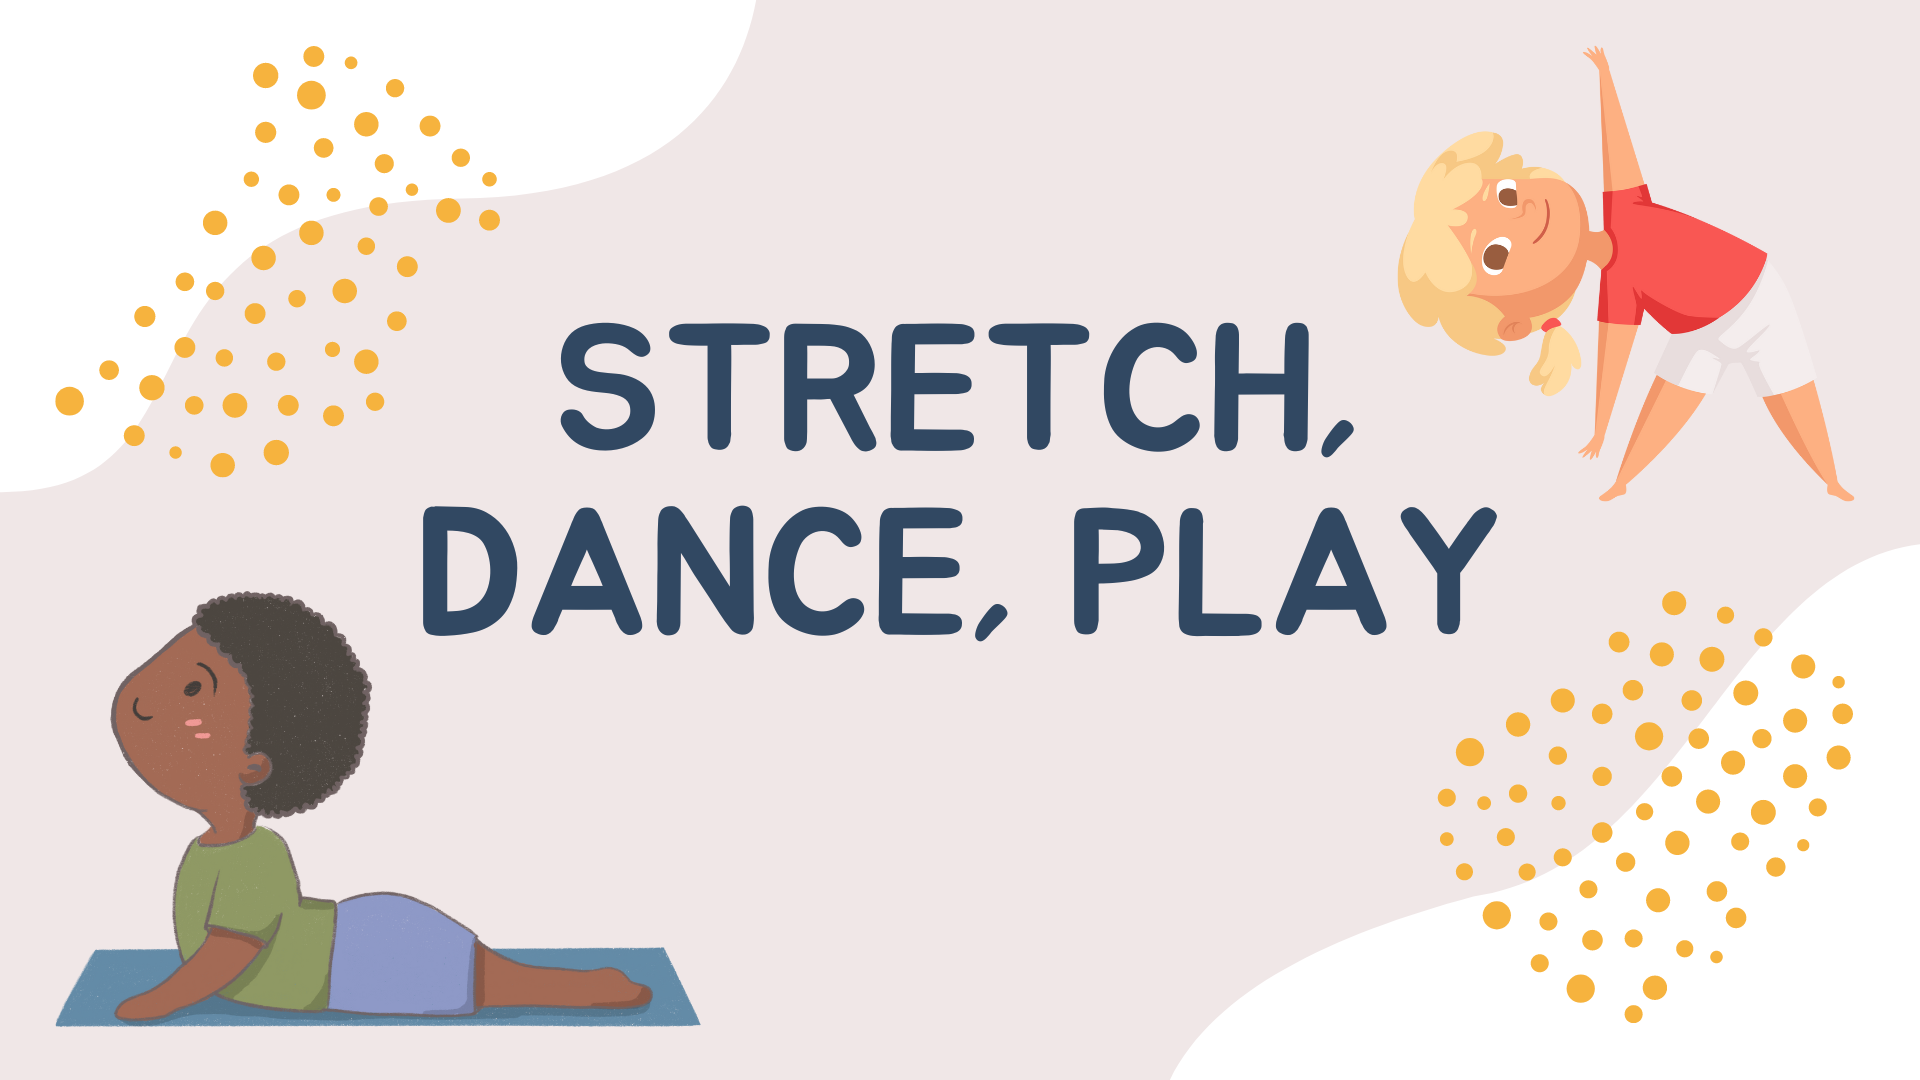 Stretch, Dance, Play | City of Milwaukie Oregon Official Website